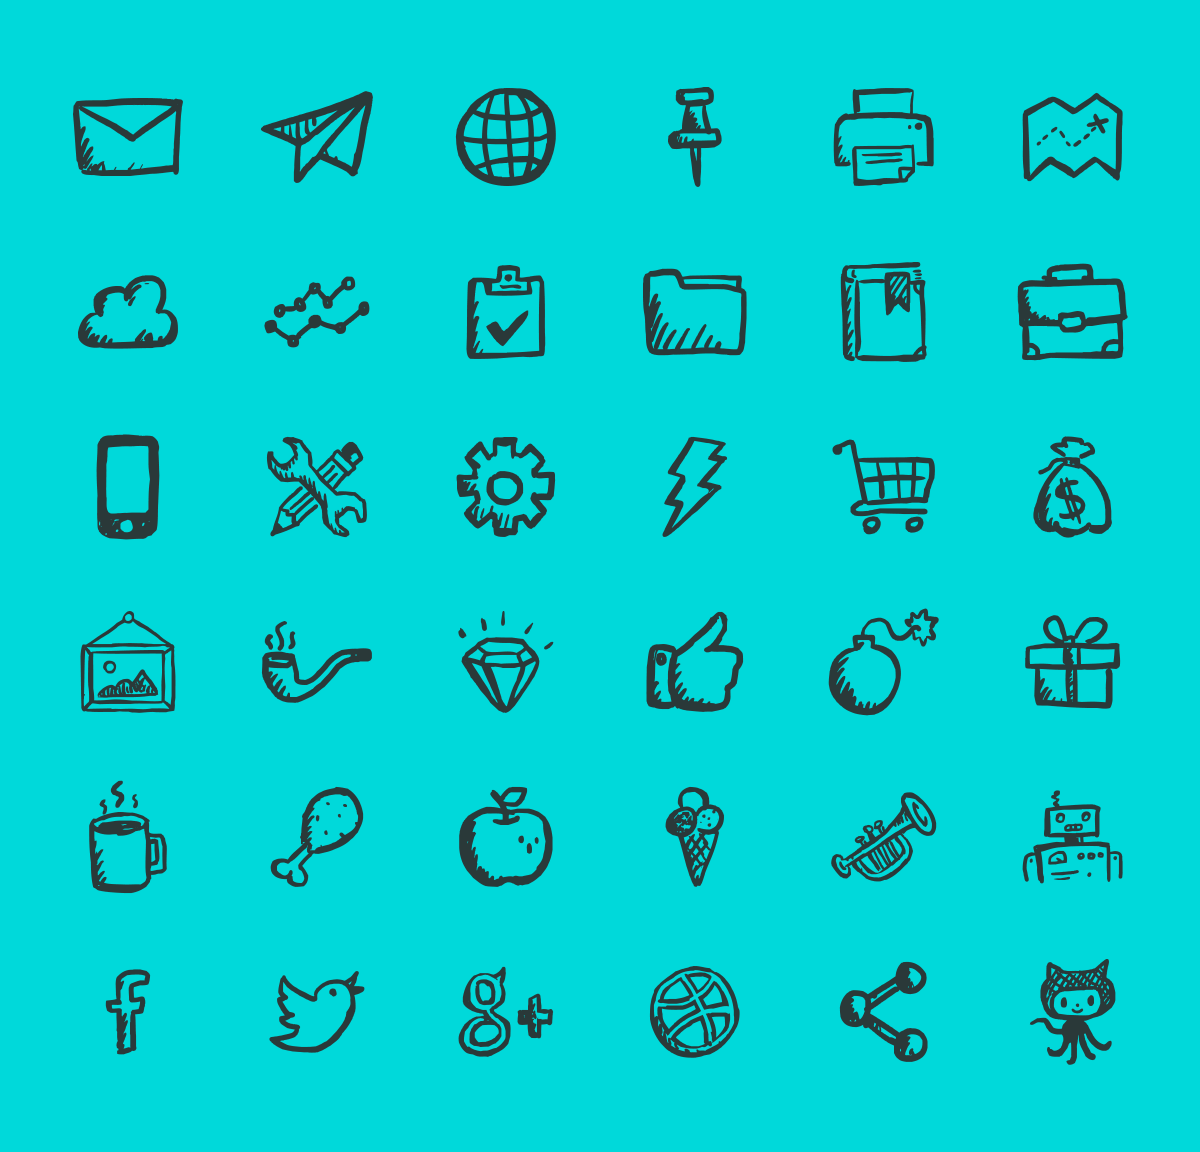 Free Hand-drawn Outline Icons Available in Ai, EPS, PDF & PSD (36 Icons)